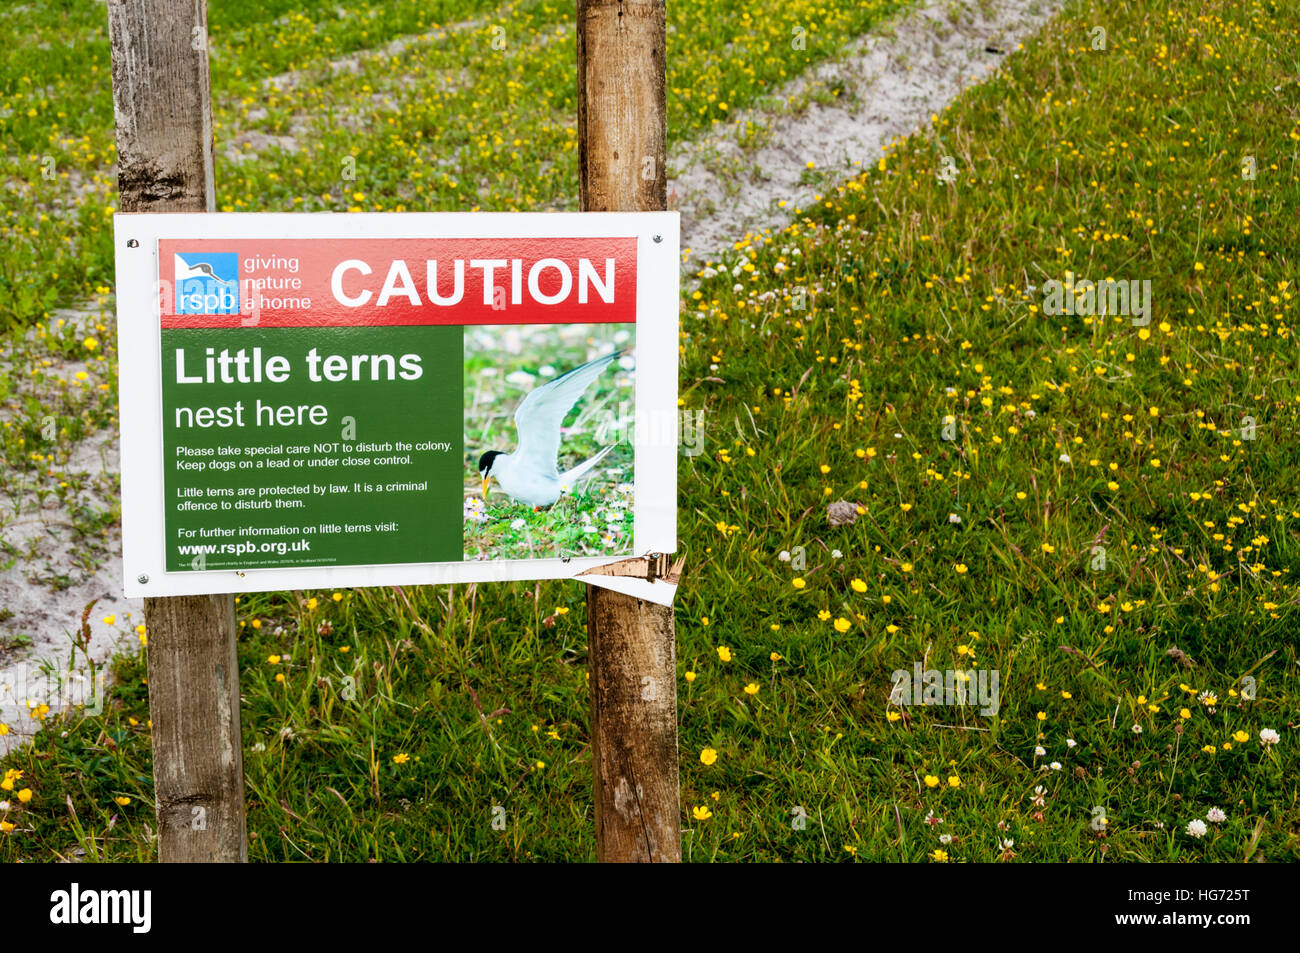 RSPB sign warns against disturbing the nests of little terns on Berneray in the Outer Hebrides. Stock Photo